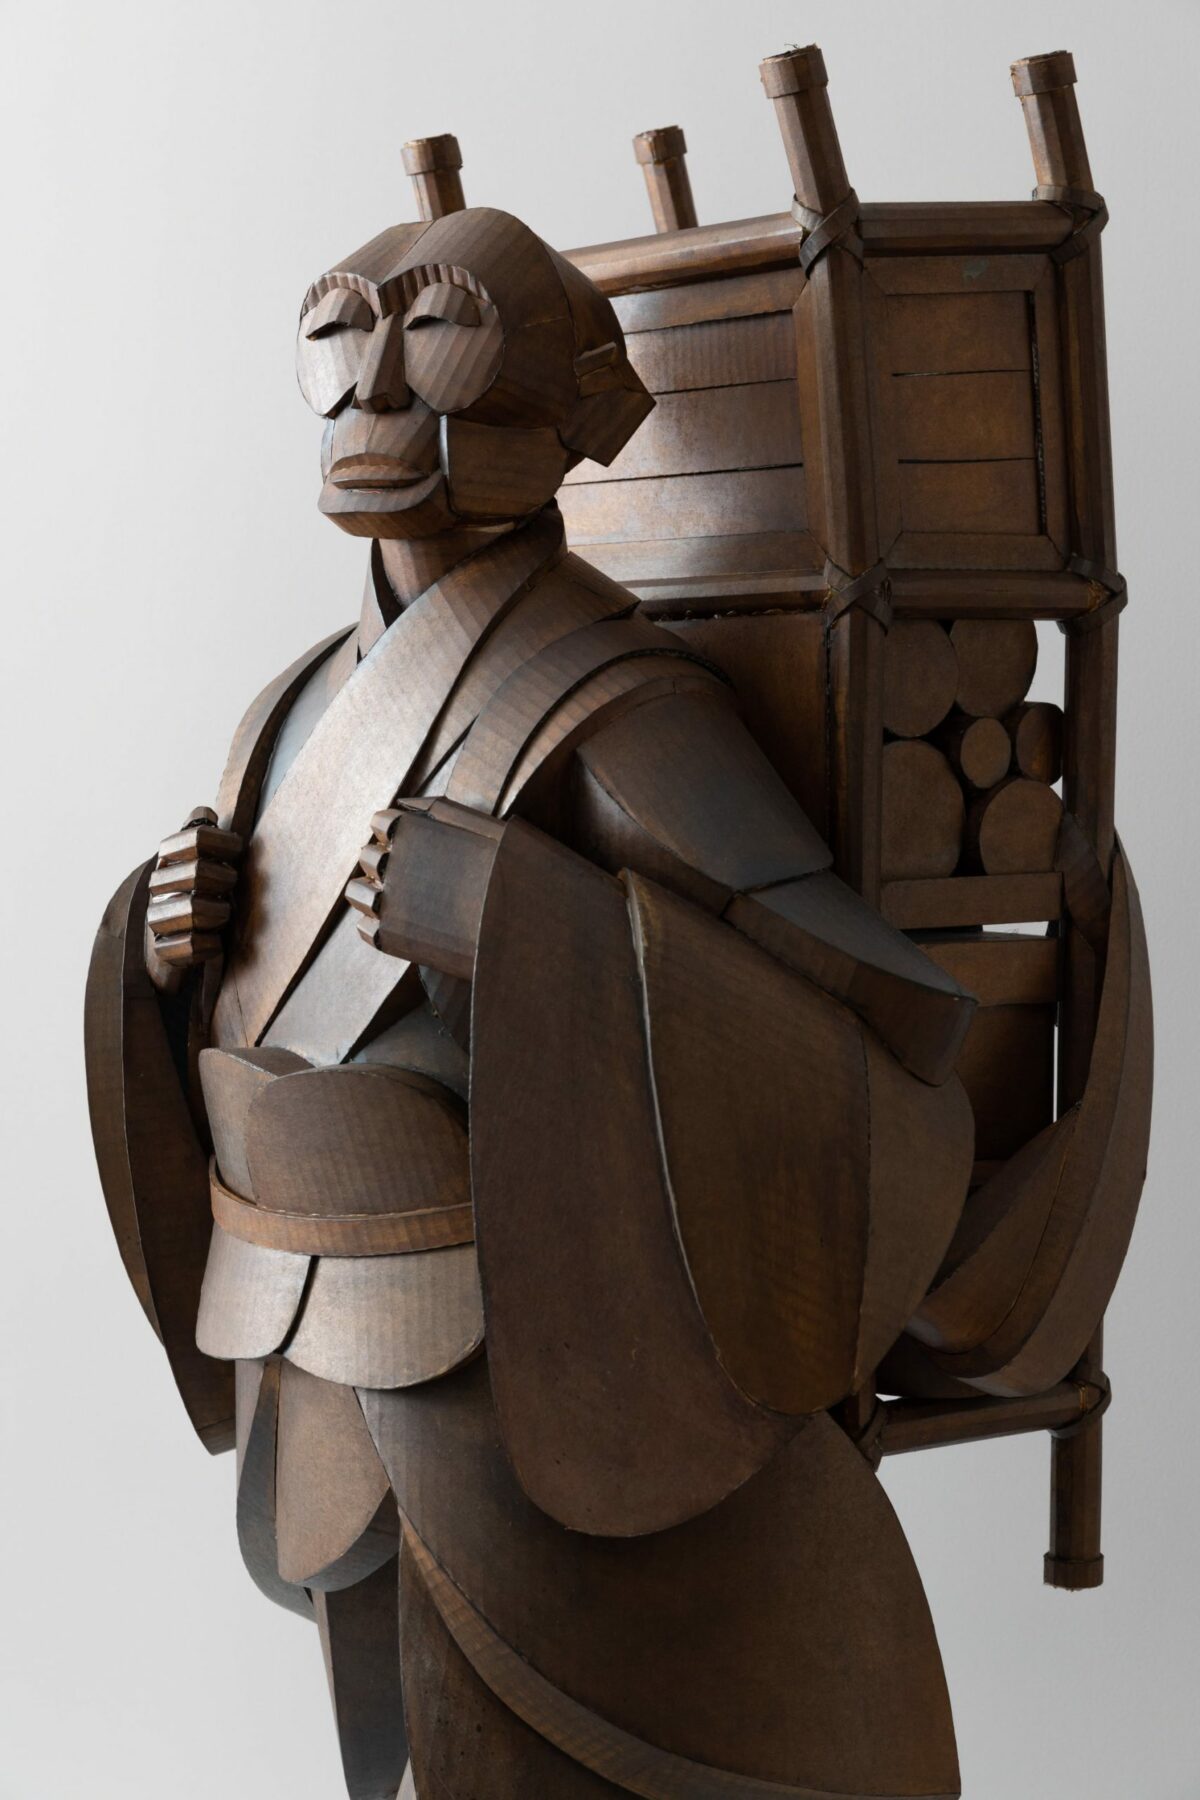 New Figurative Sculptures Made Of Cardboard By Warren King (6)